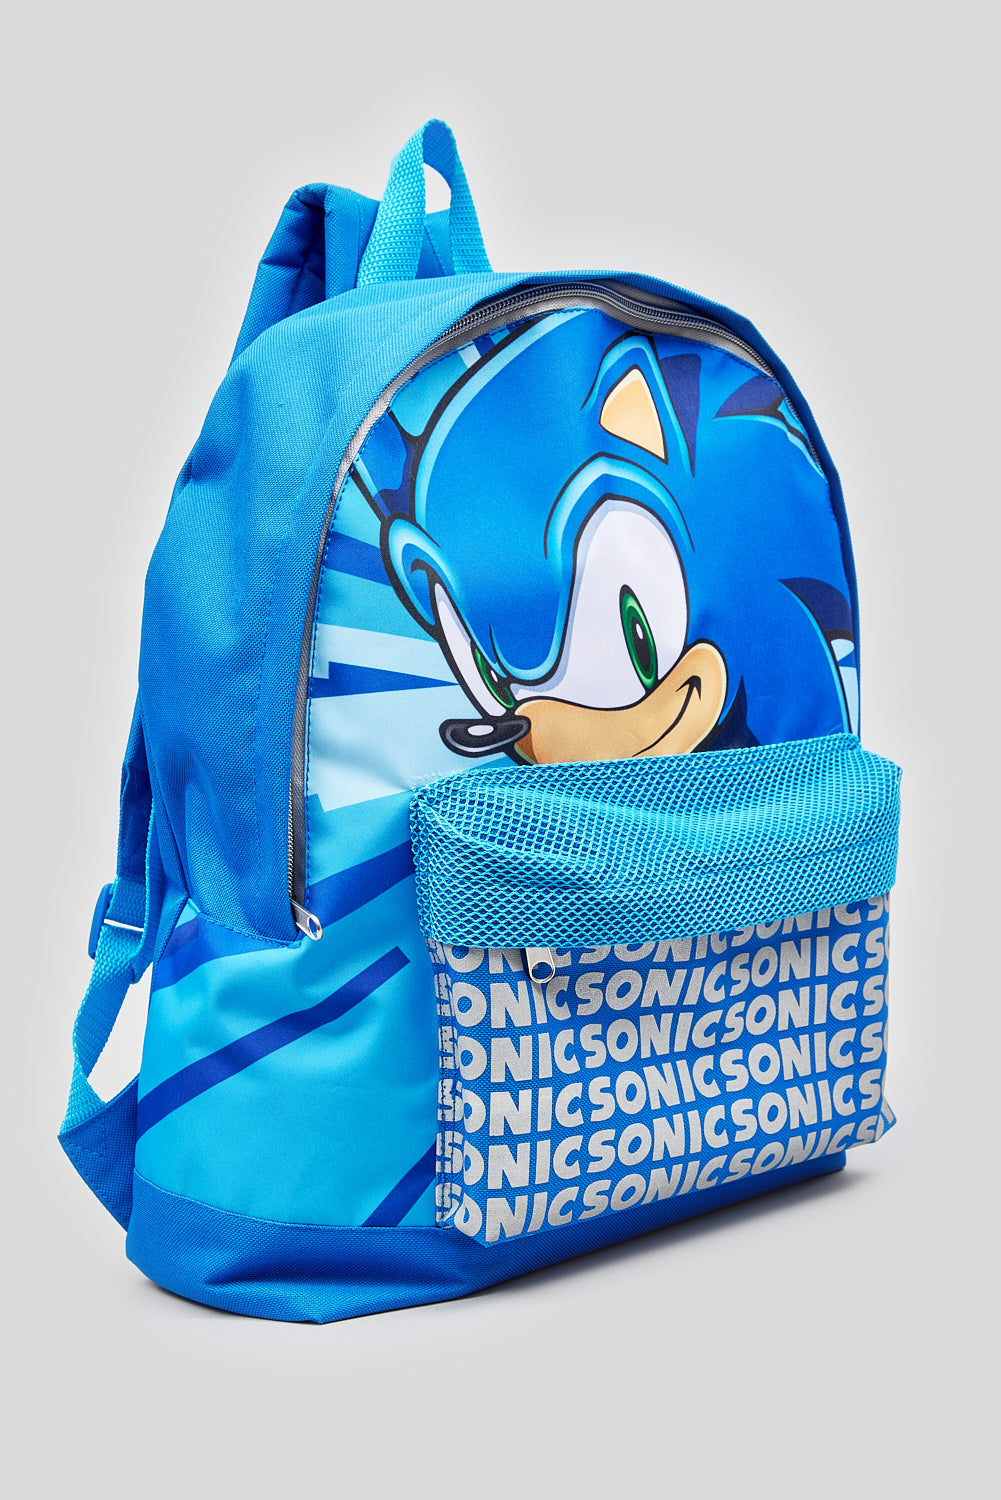 SONIC THE HEDGEHOG EXPLOSION ROXY BACKPACK